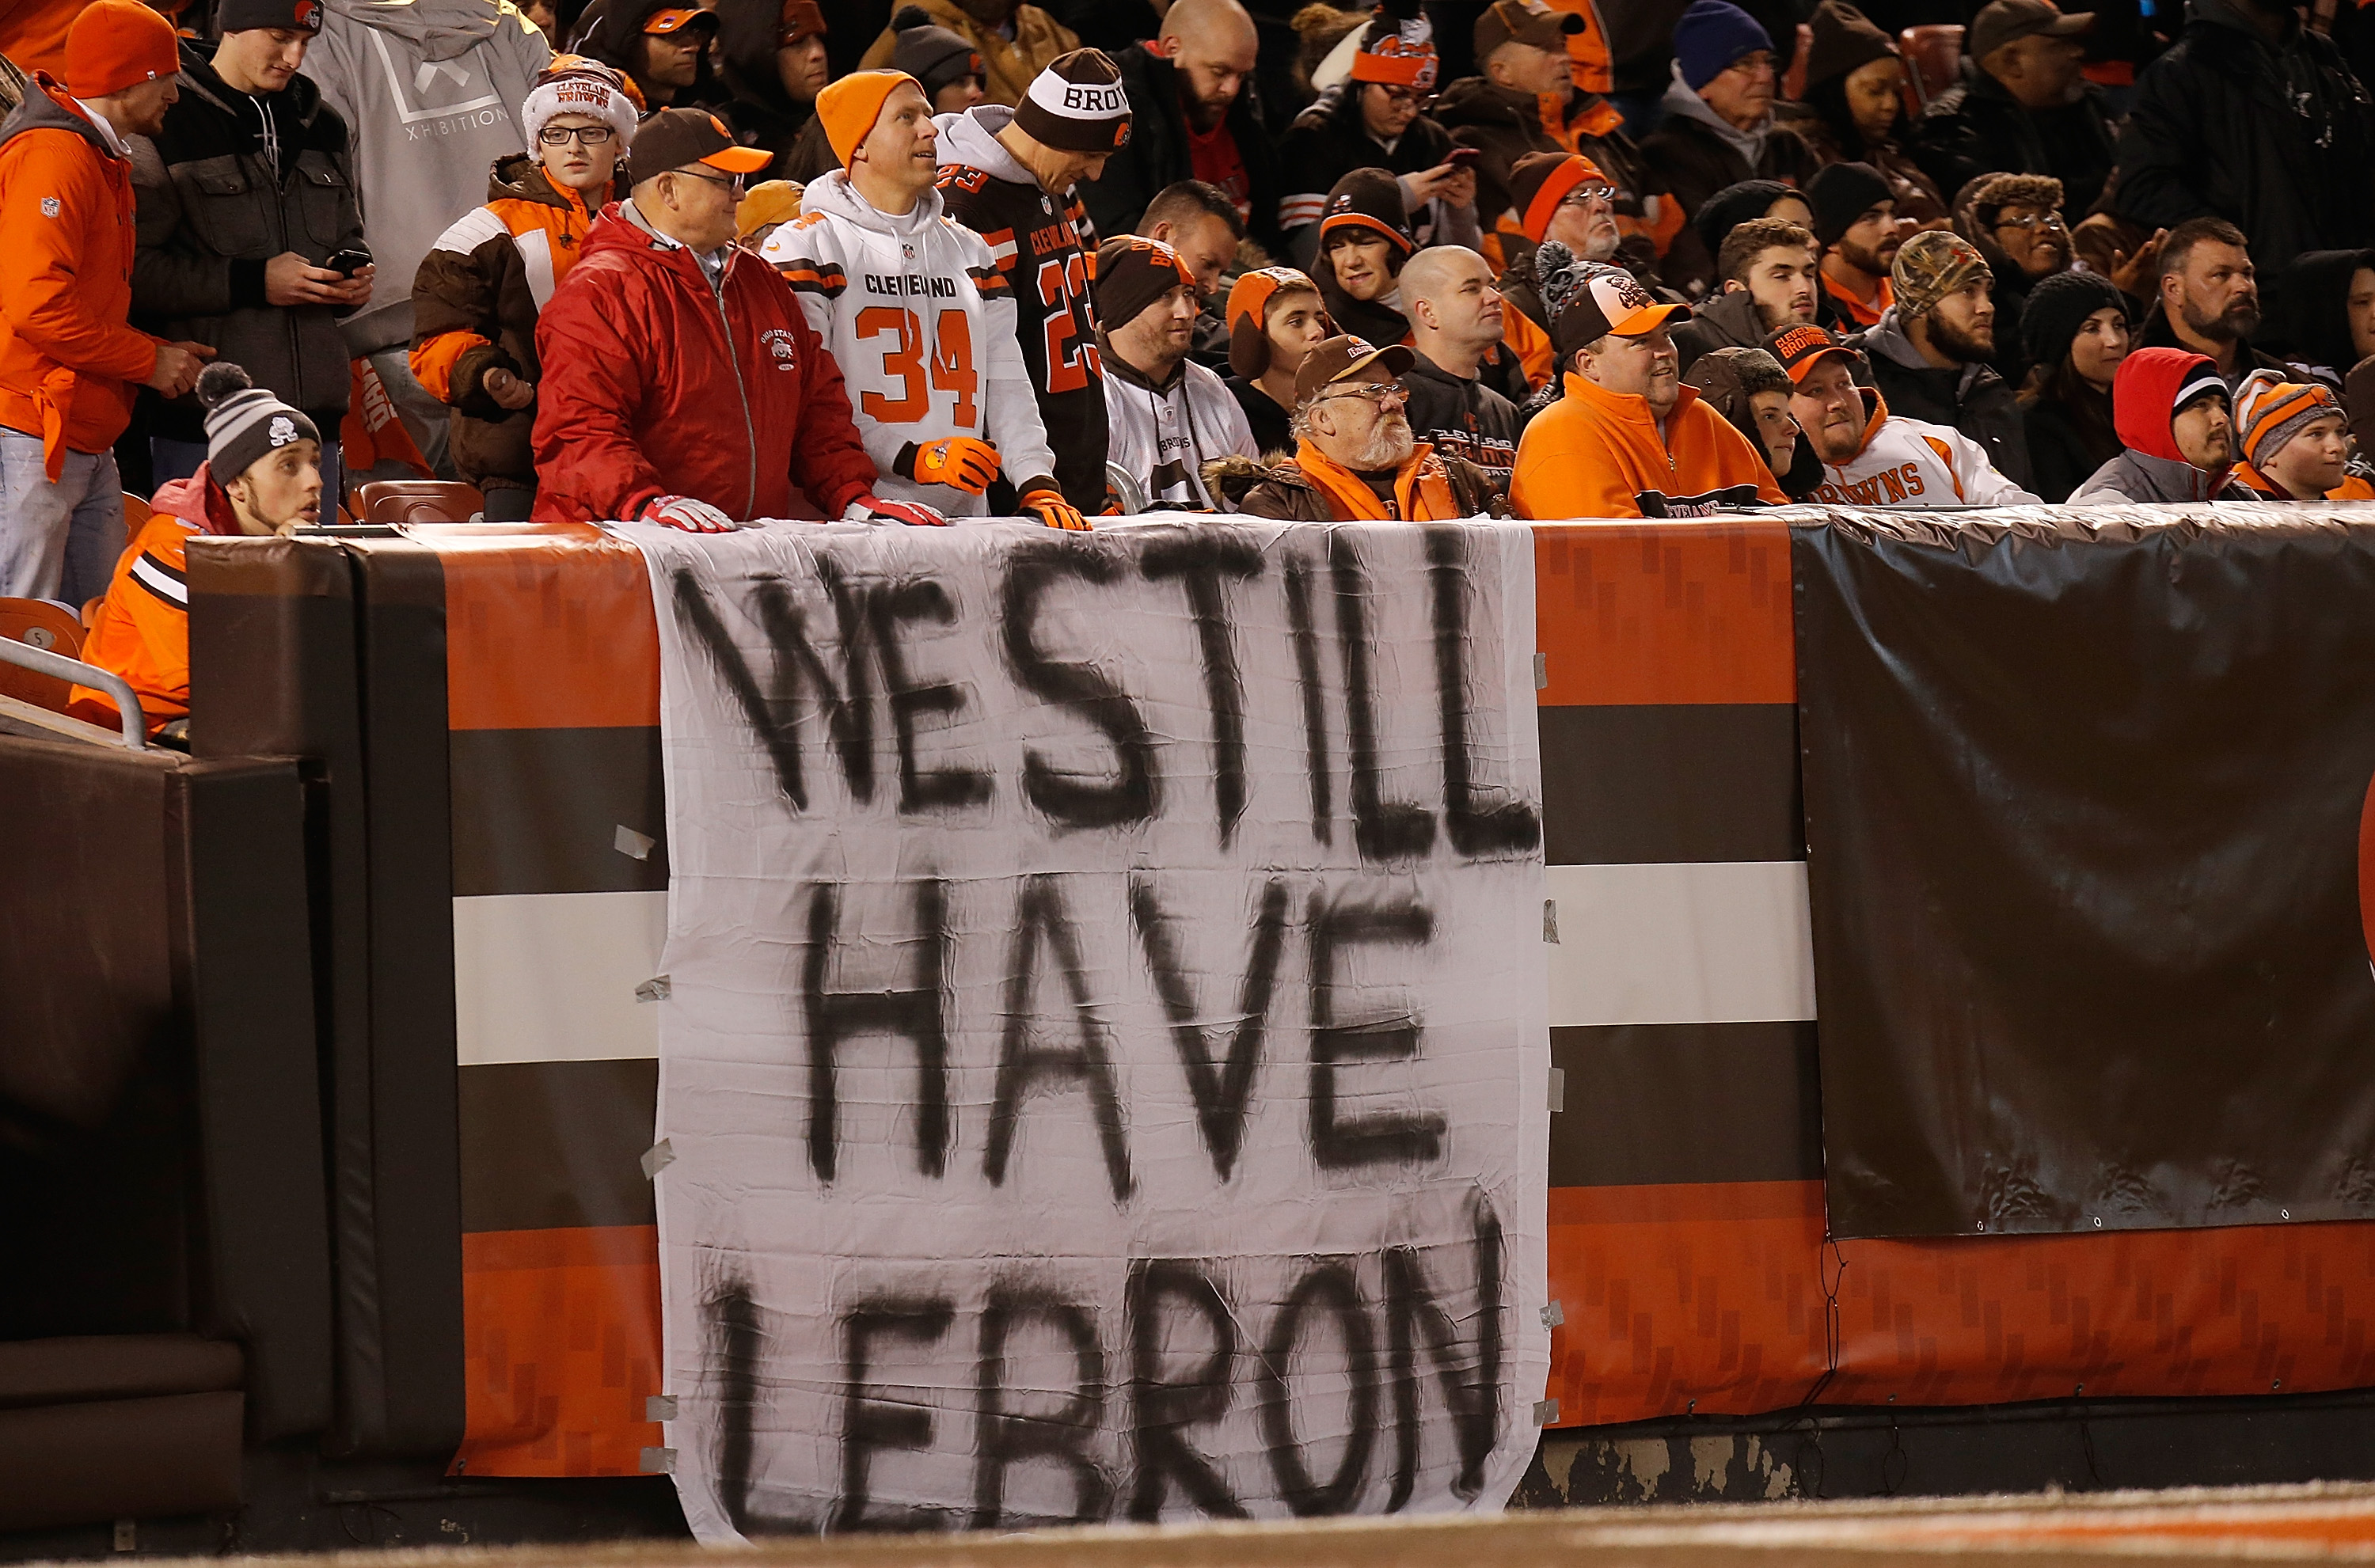 LeBron Rips Browns Organization For Fans Having 0-16 Parade: "You’ve G...